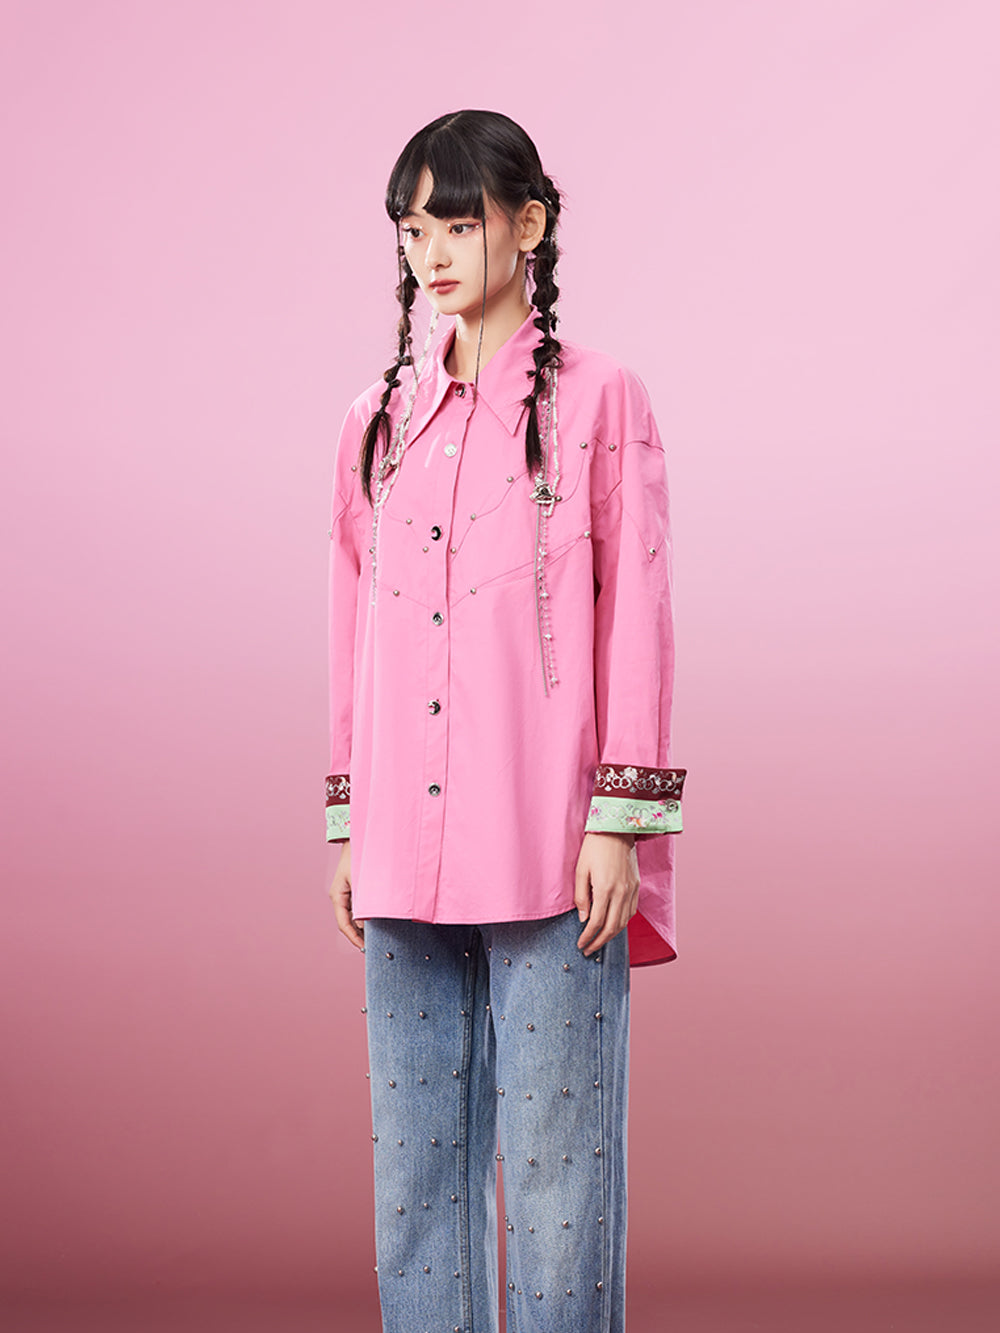 MUKZIN Pink Comfortable Loose High Quality Casual Shirt